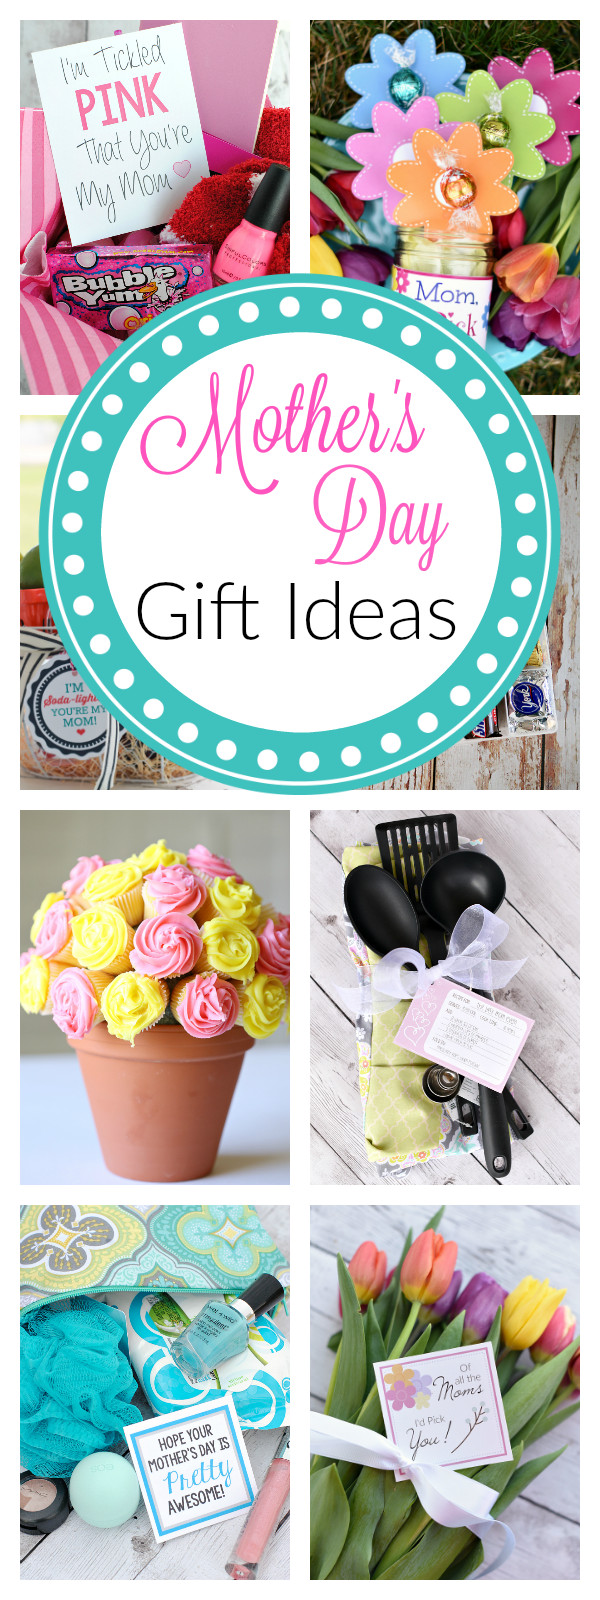 Mother'S Day Dinner Ideas Pinterest
 25 Fun Mother s Day Gift Ideas – Fun Squared